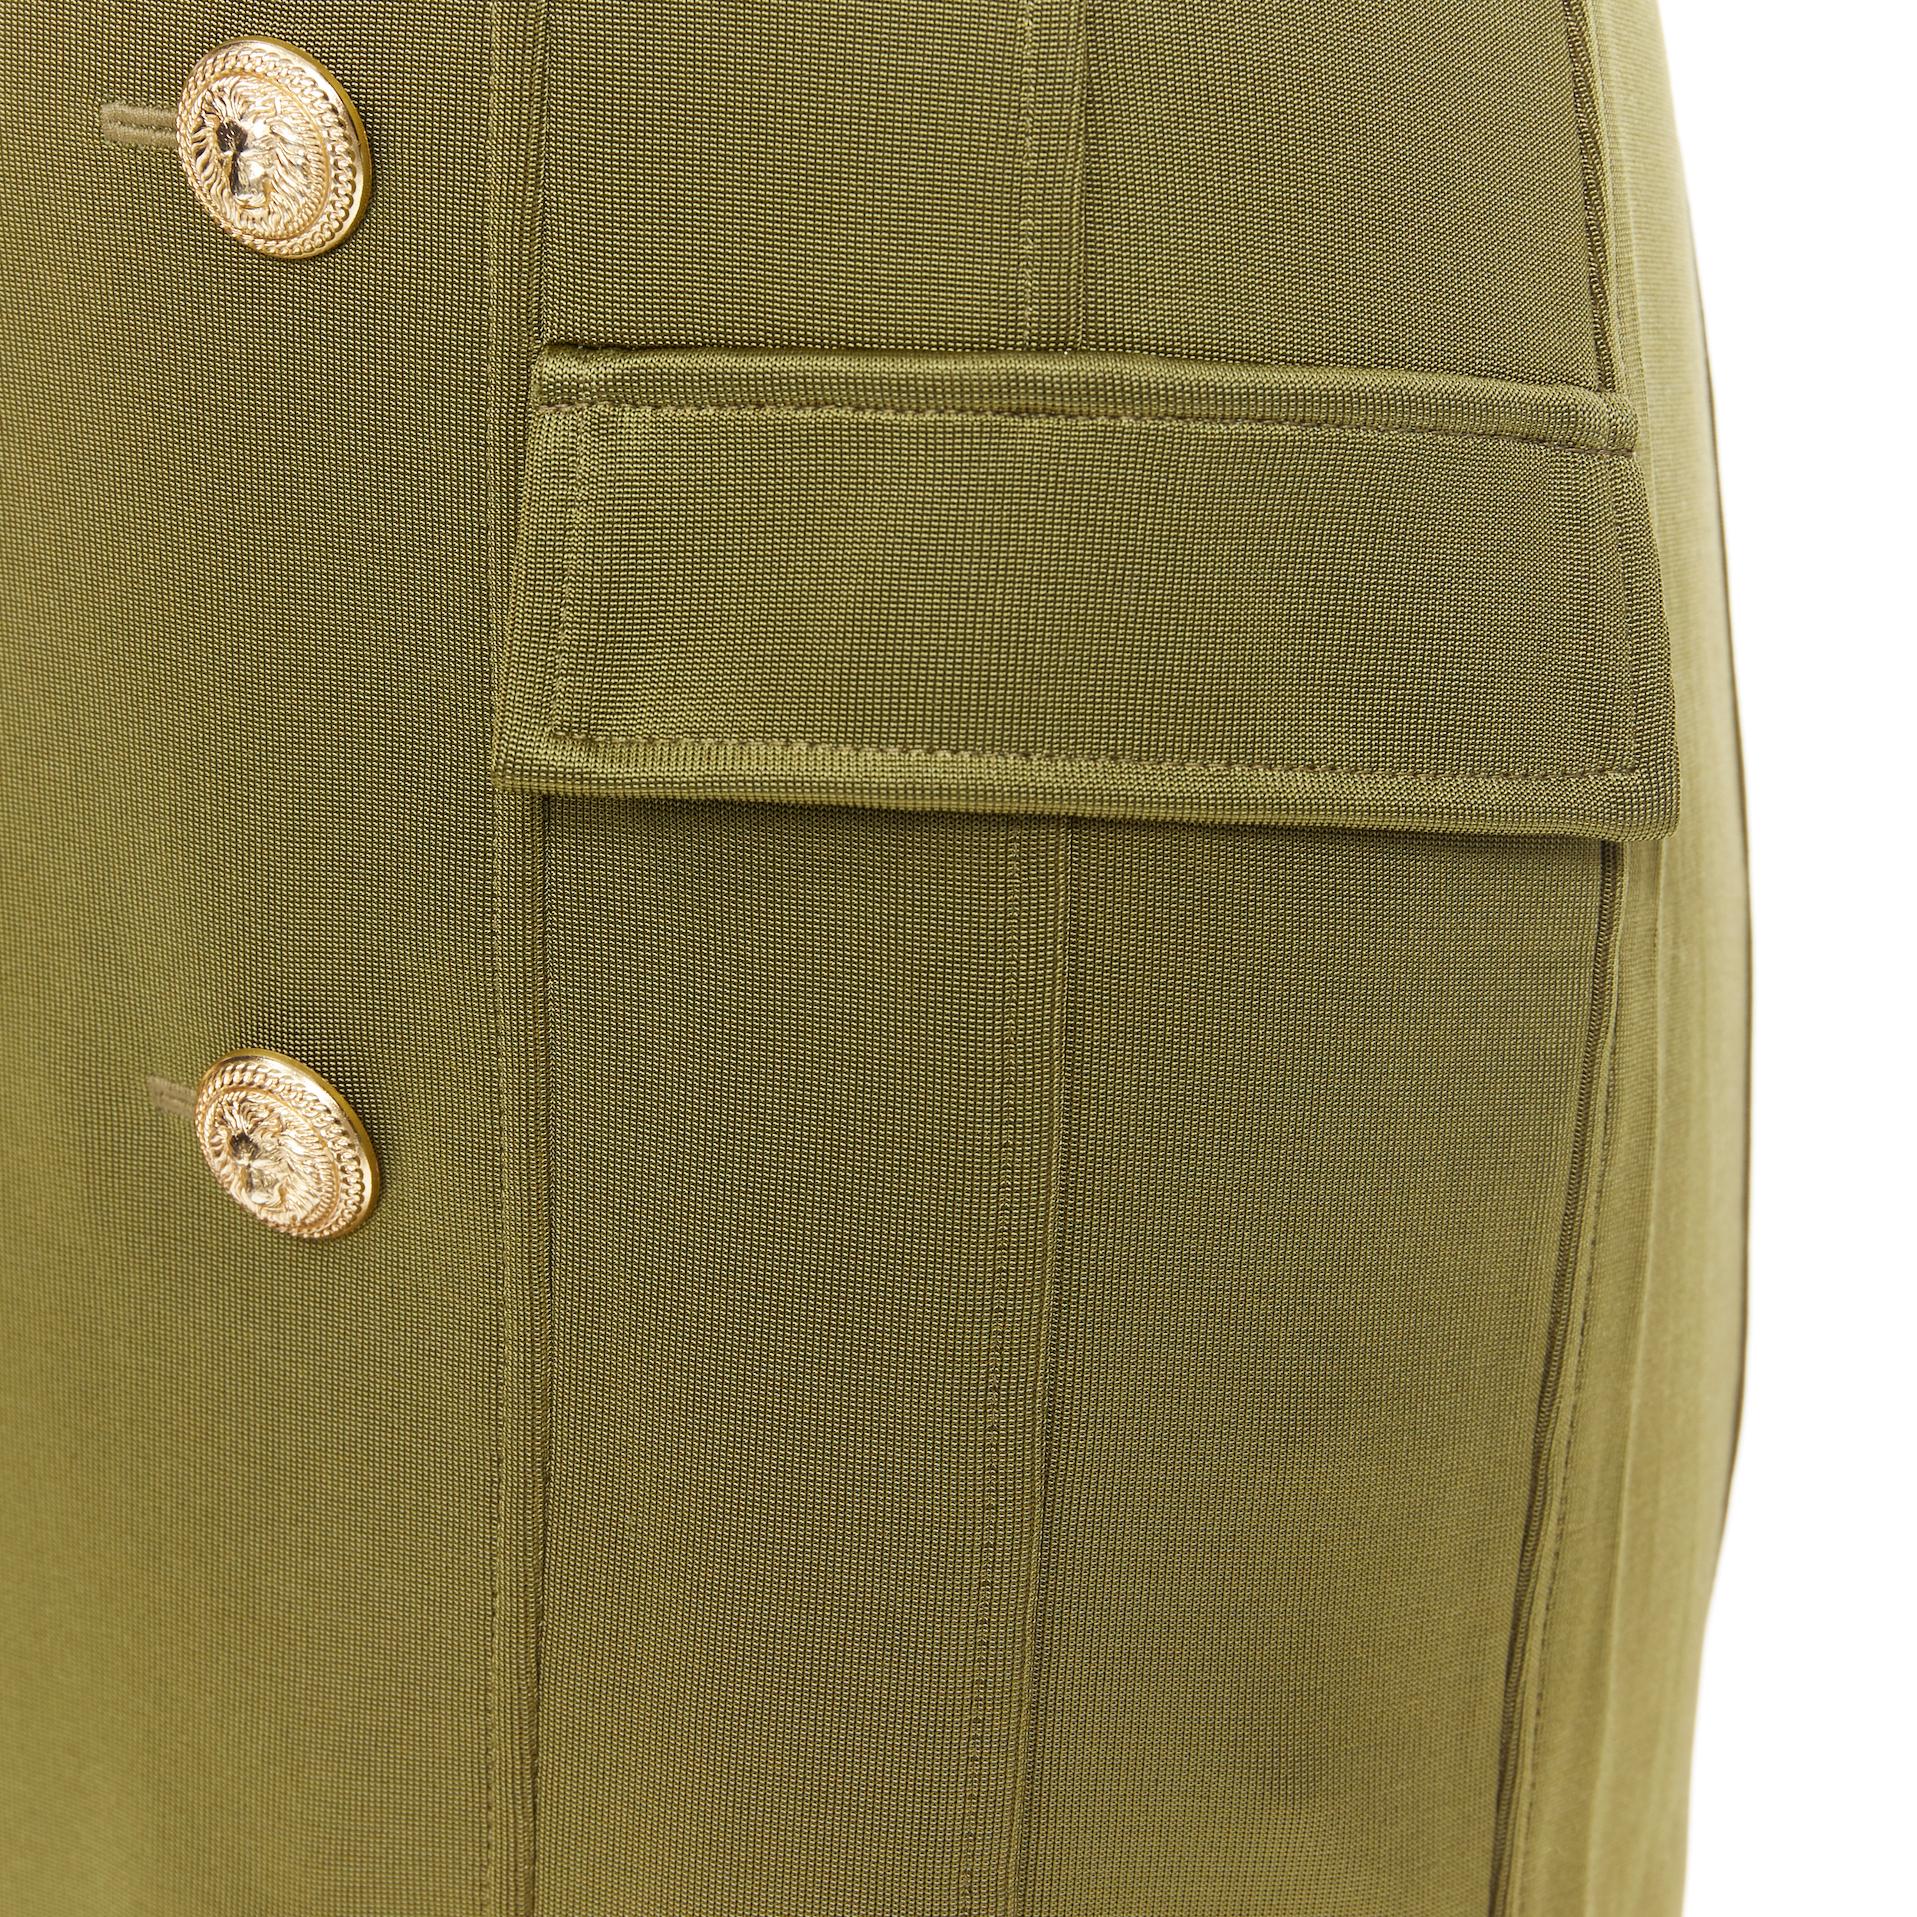 new BALMAIN military khaki green gold double breasted wrap bodycon dress IT38
Brand: Balmain
Designer: Olivier Rousteing
Model Name / Style: Double breasted dress
Material: Viscose
Color: Green
Pattern: Solid
Closure: Zip
Extra Detail: Decorative